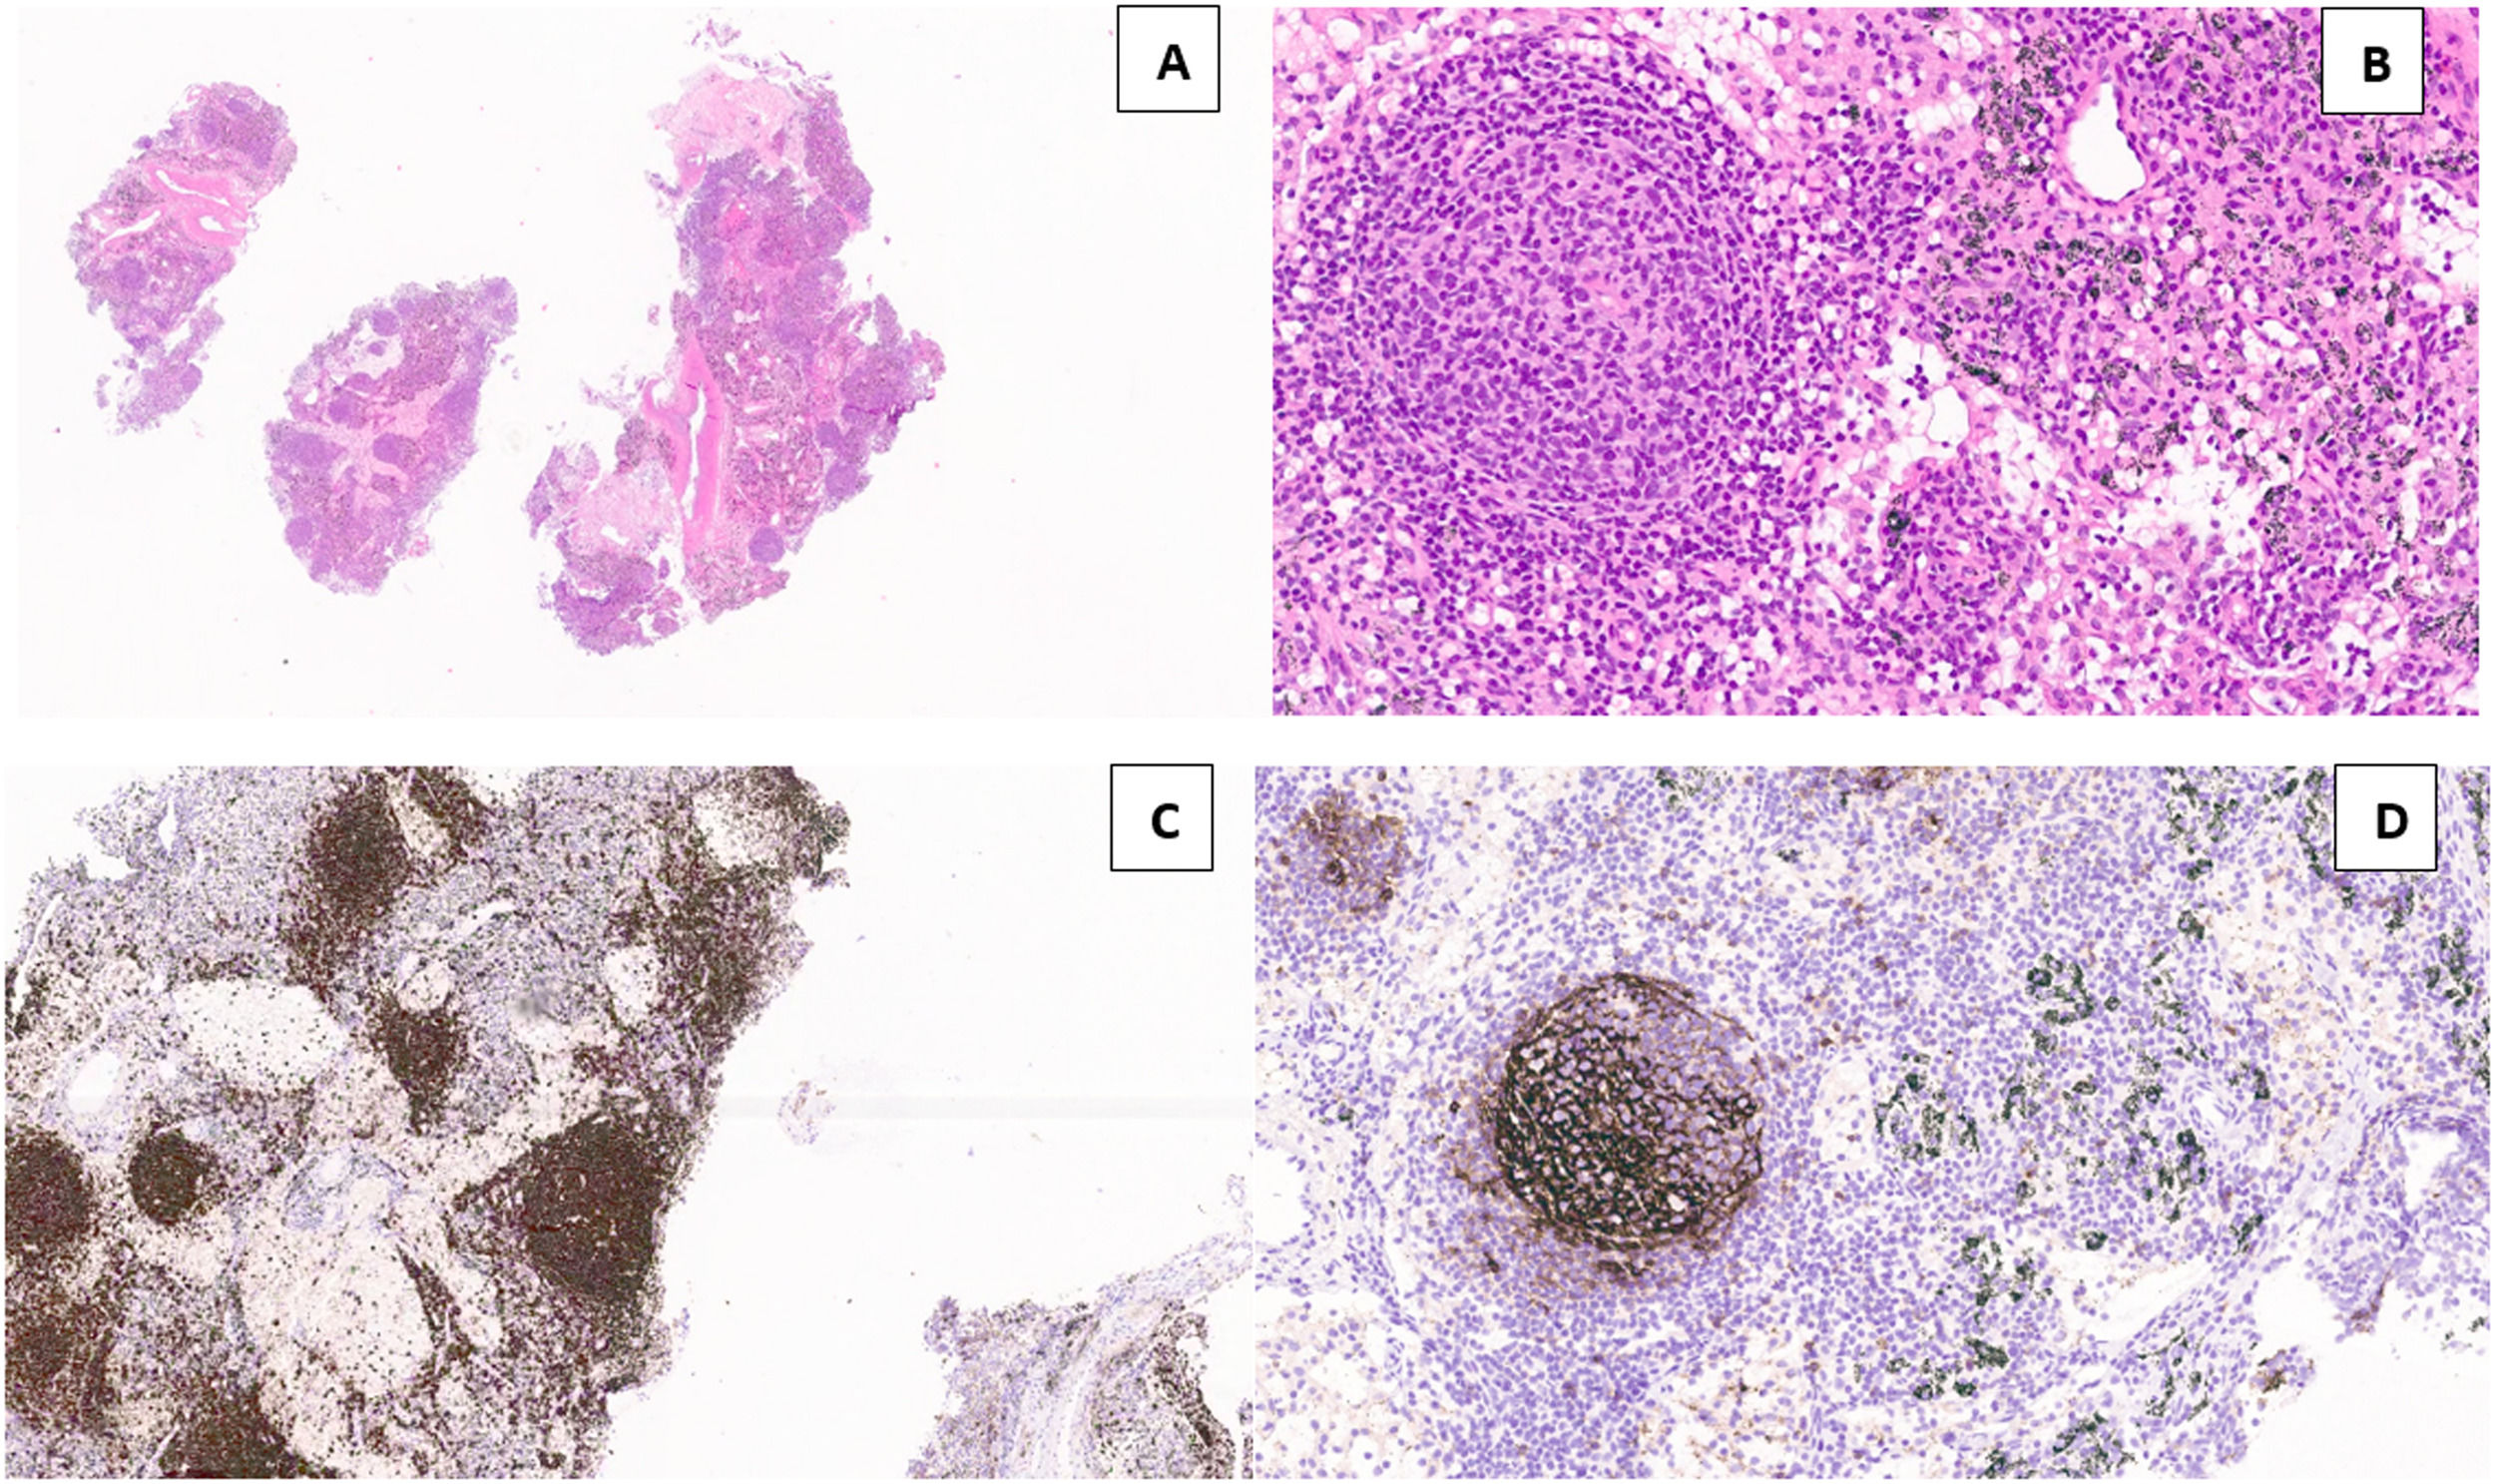 EBUS-guided cryobiopsy in the diagnosis of thoracic disorders | Pulmonology